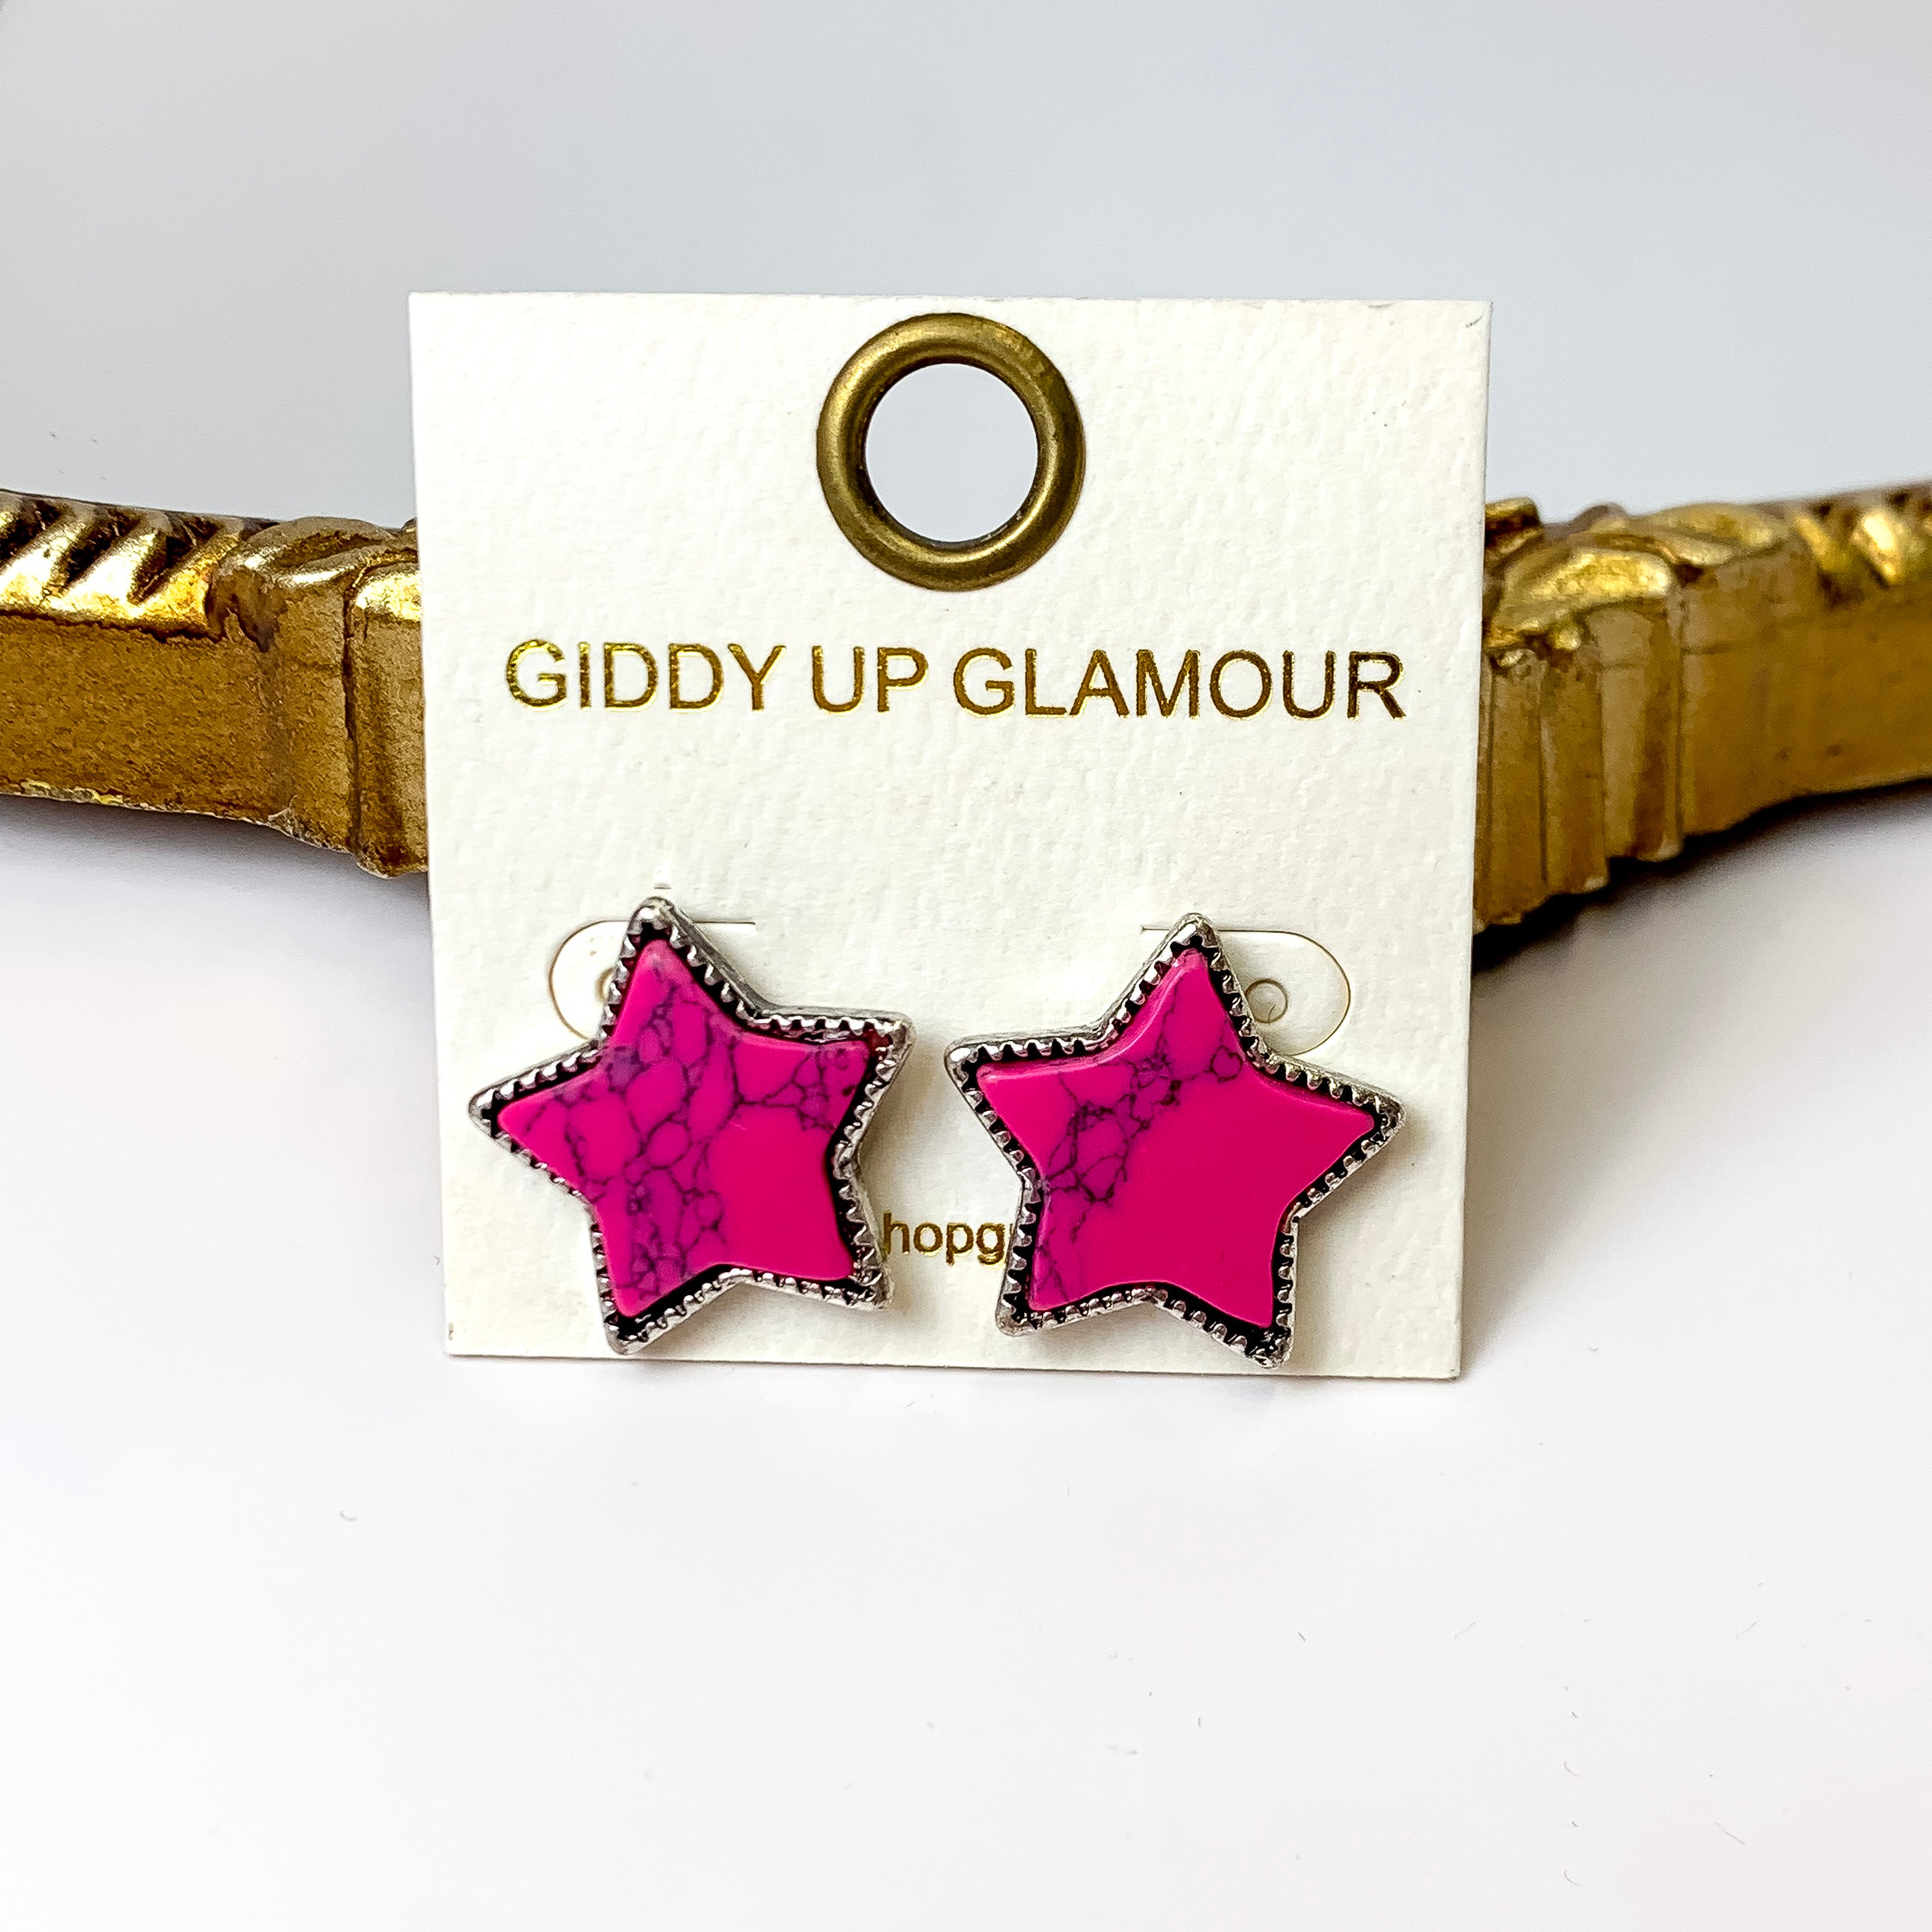 Western Star Faux Stone Post Earrings in Fuchsia Pink - Giddy Up Glamour Boutique